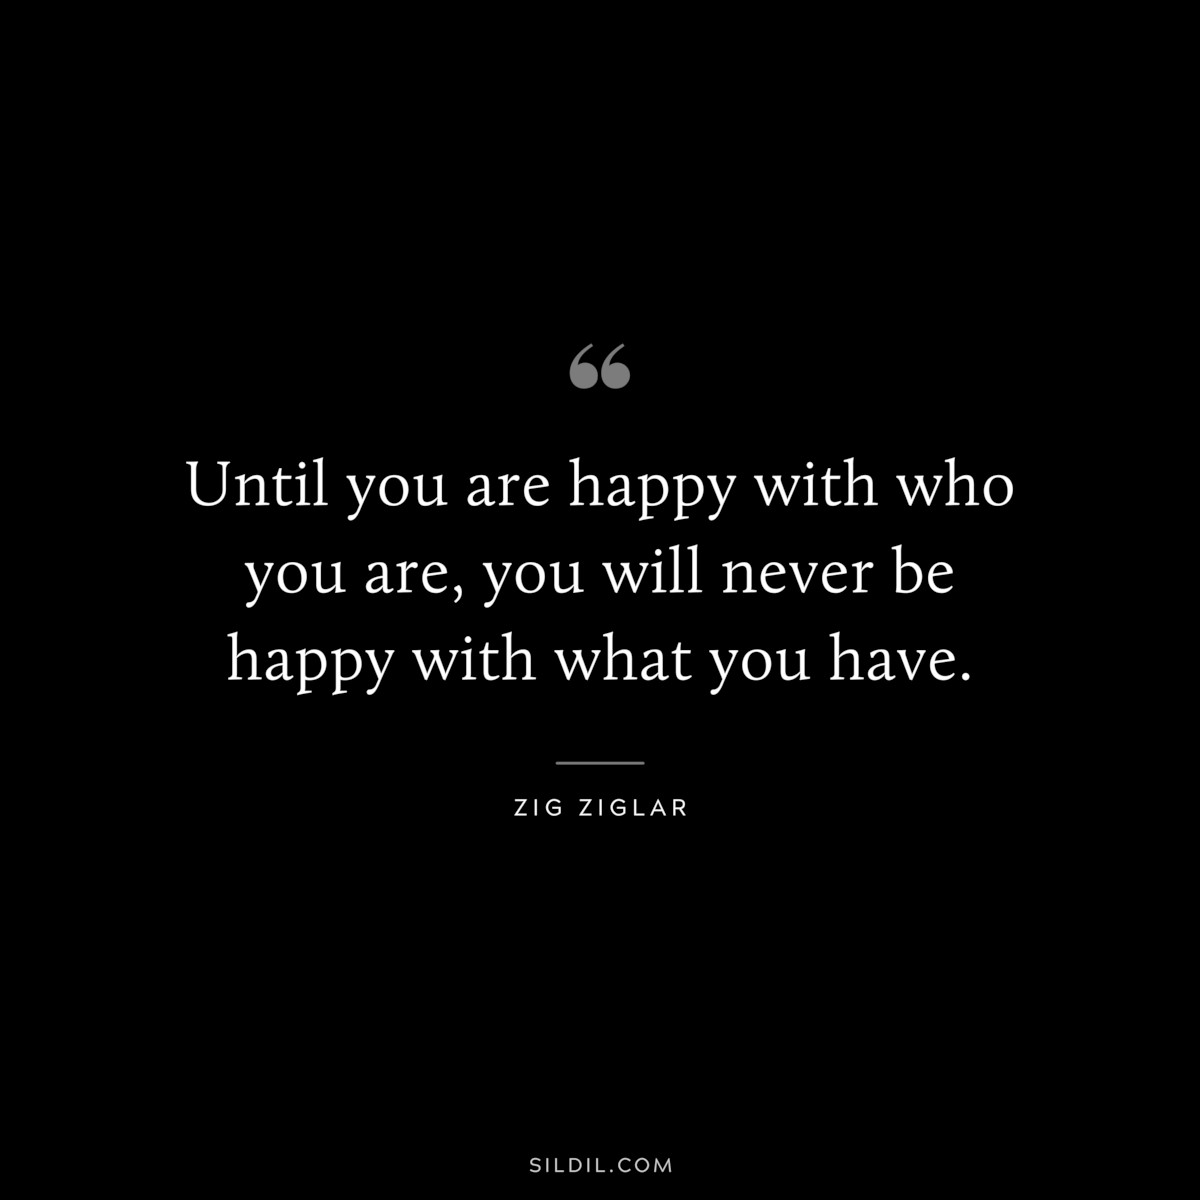 Until you are happy with who you are, you will never be happy with what you have. ― Zig Ziglar